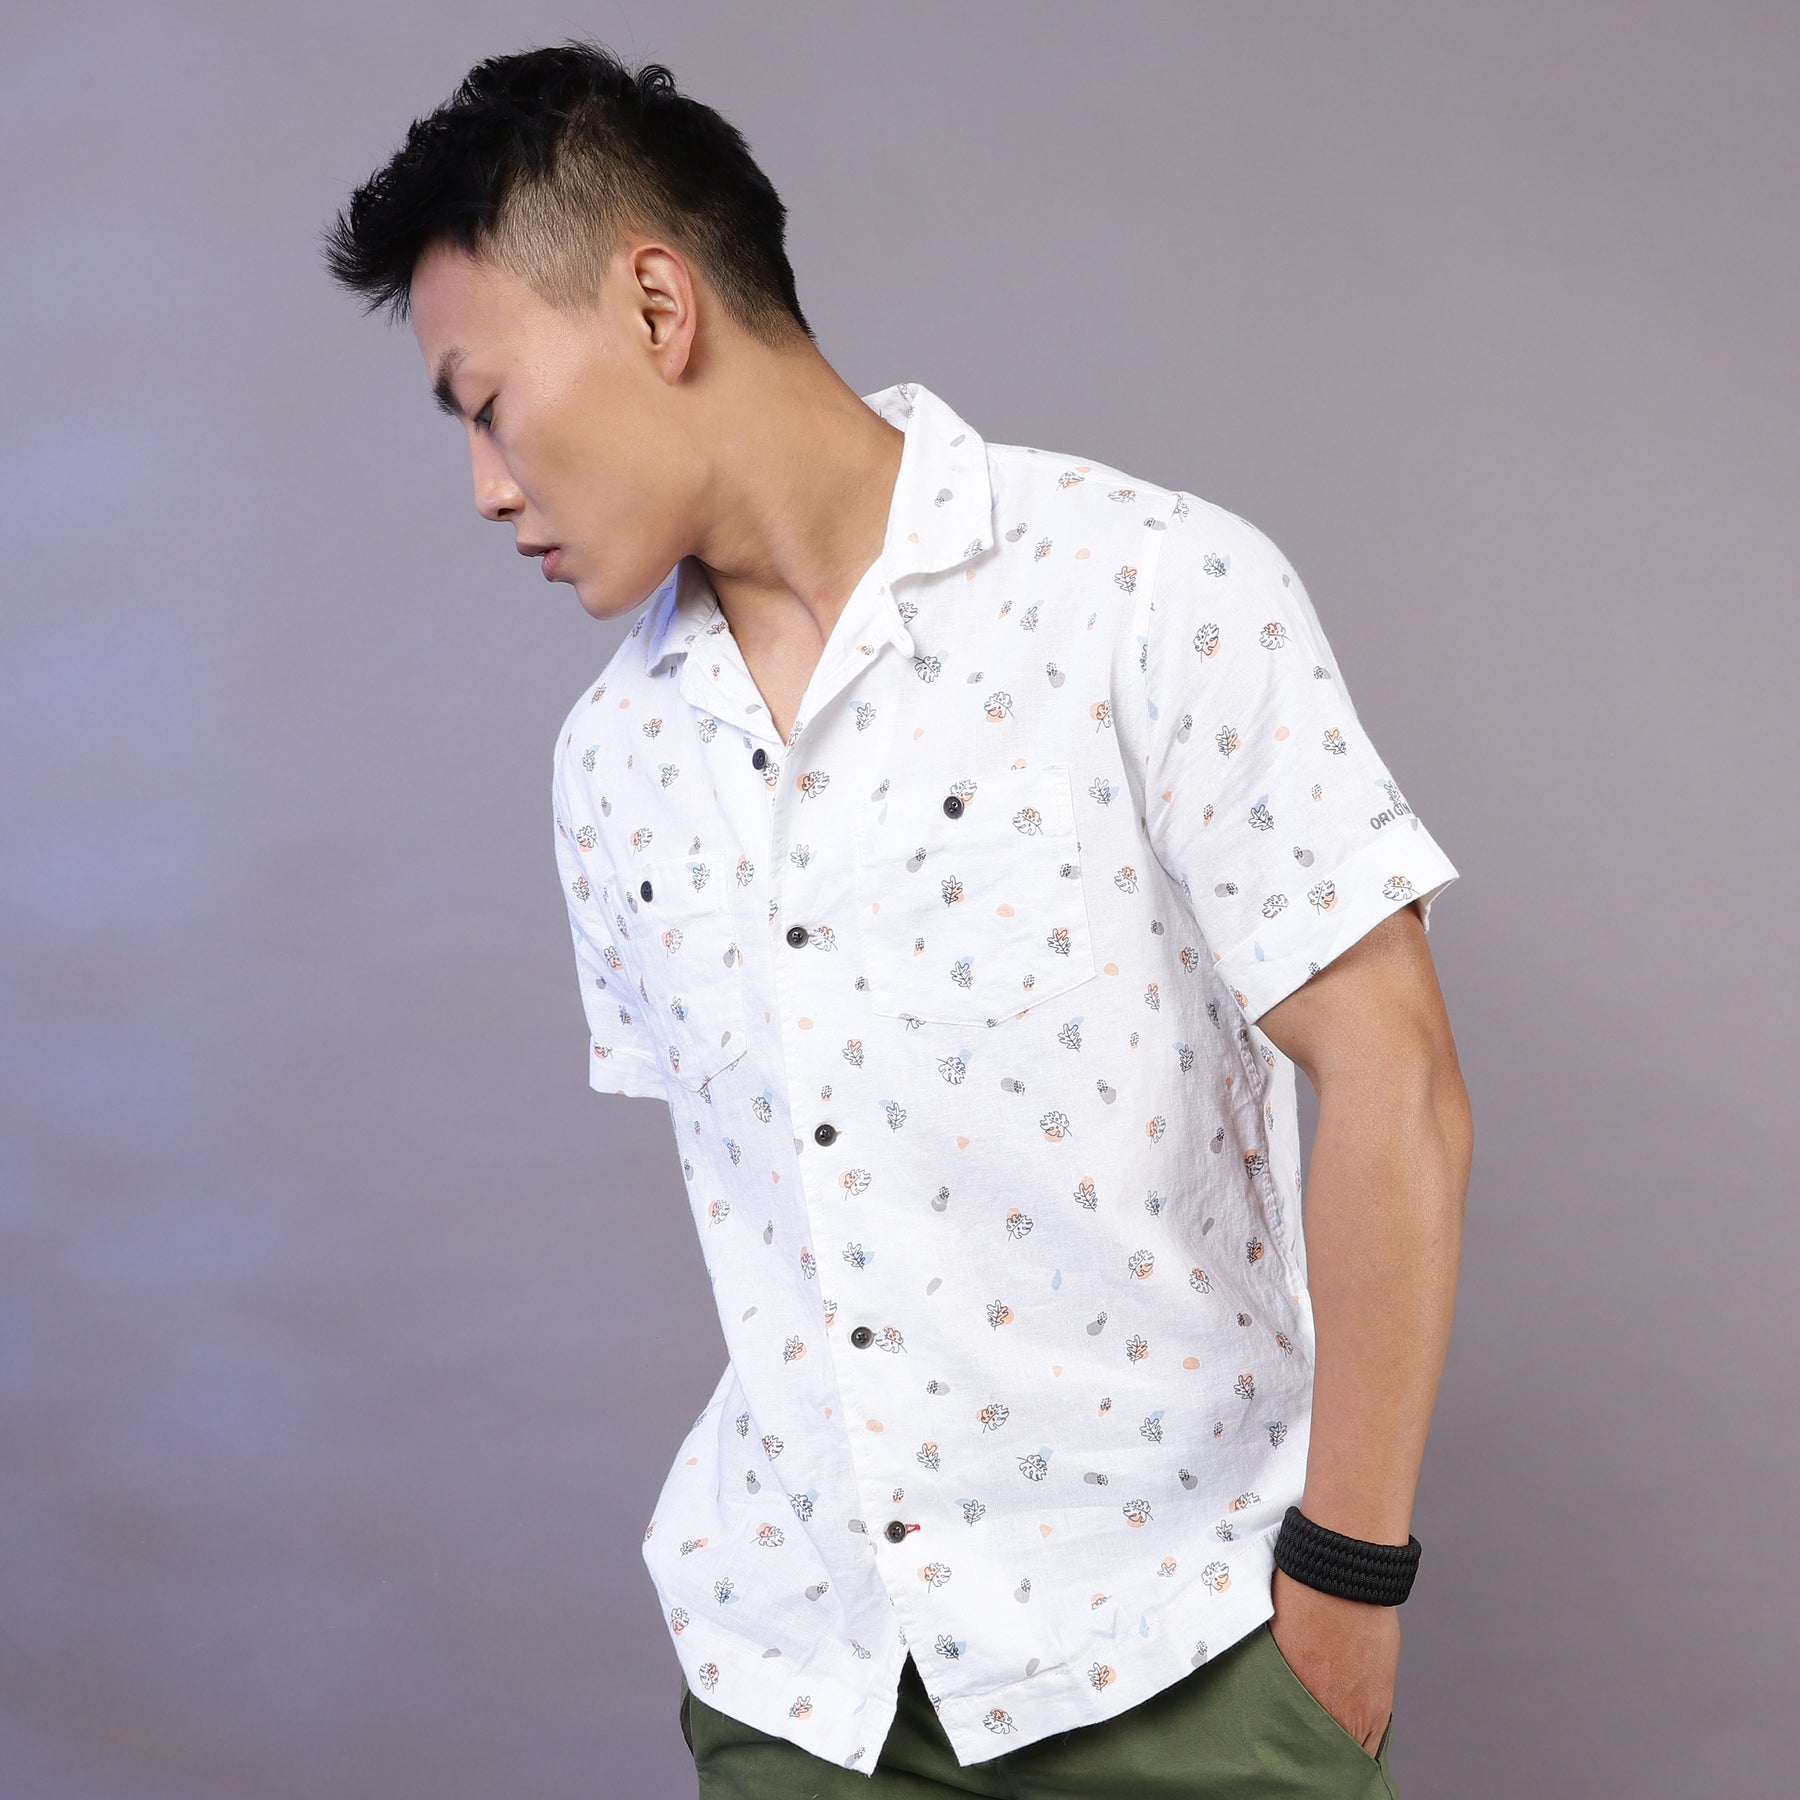 Swanky White Printed Shirt With Pockets